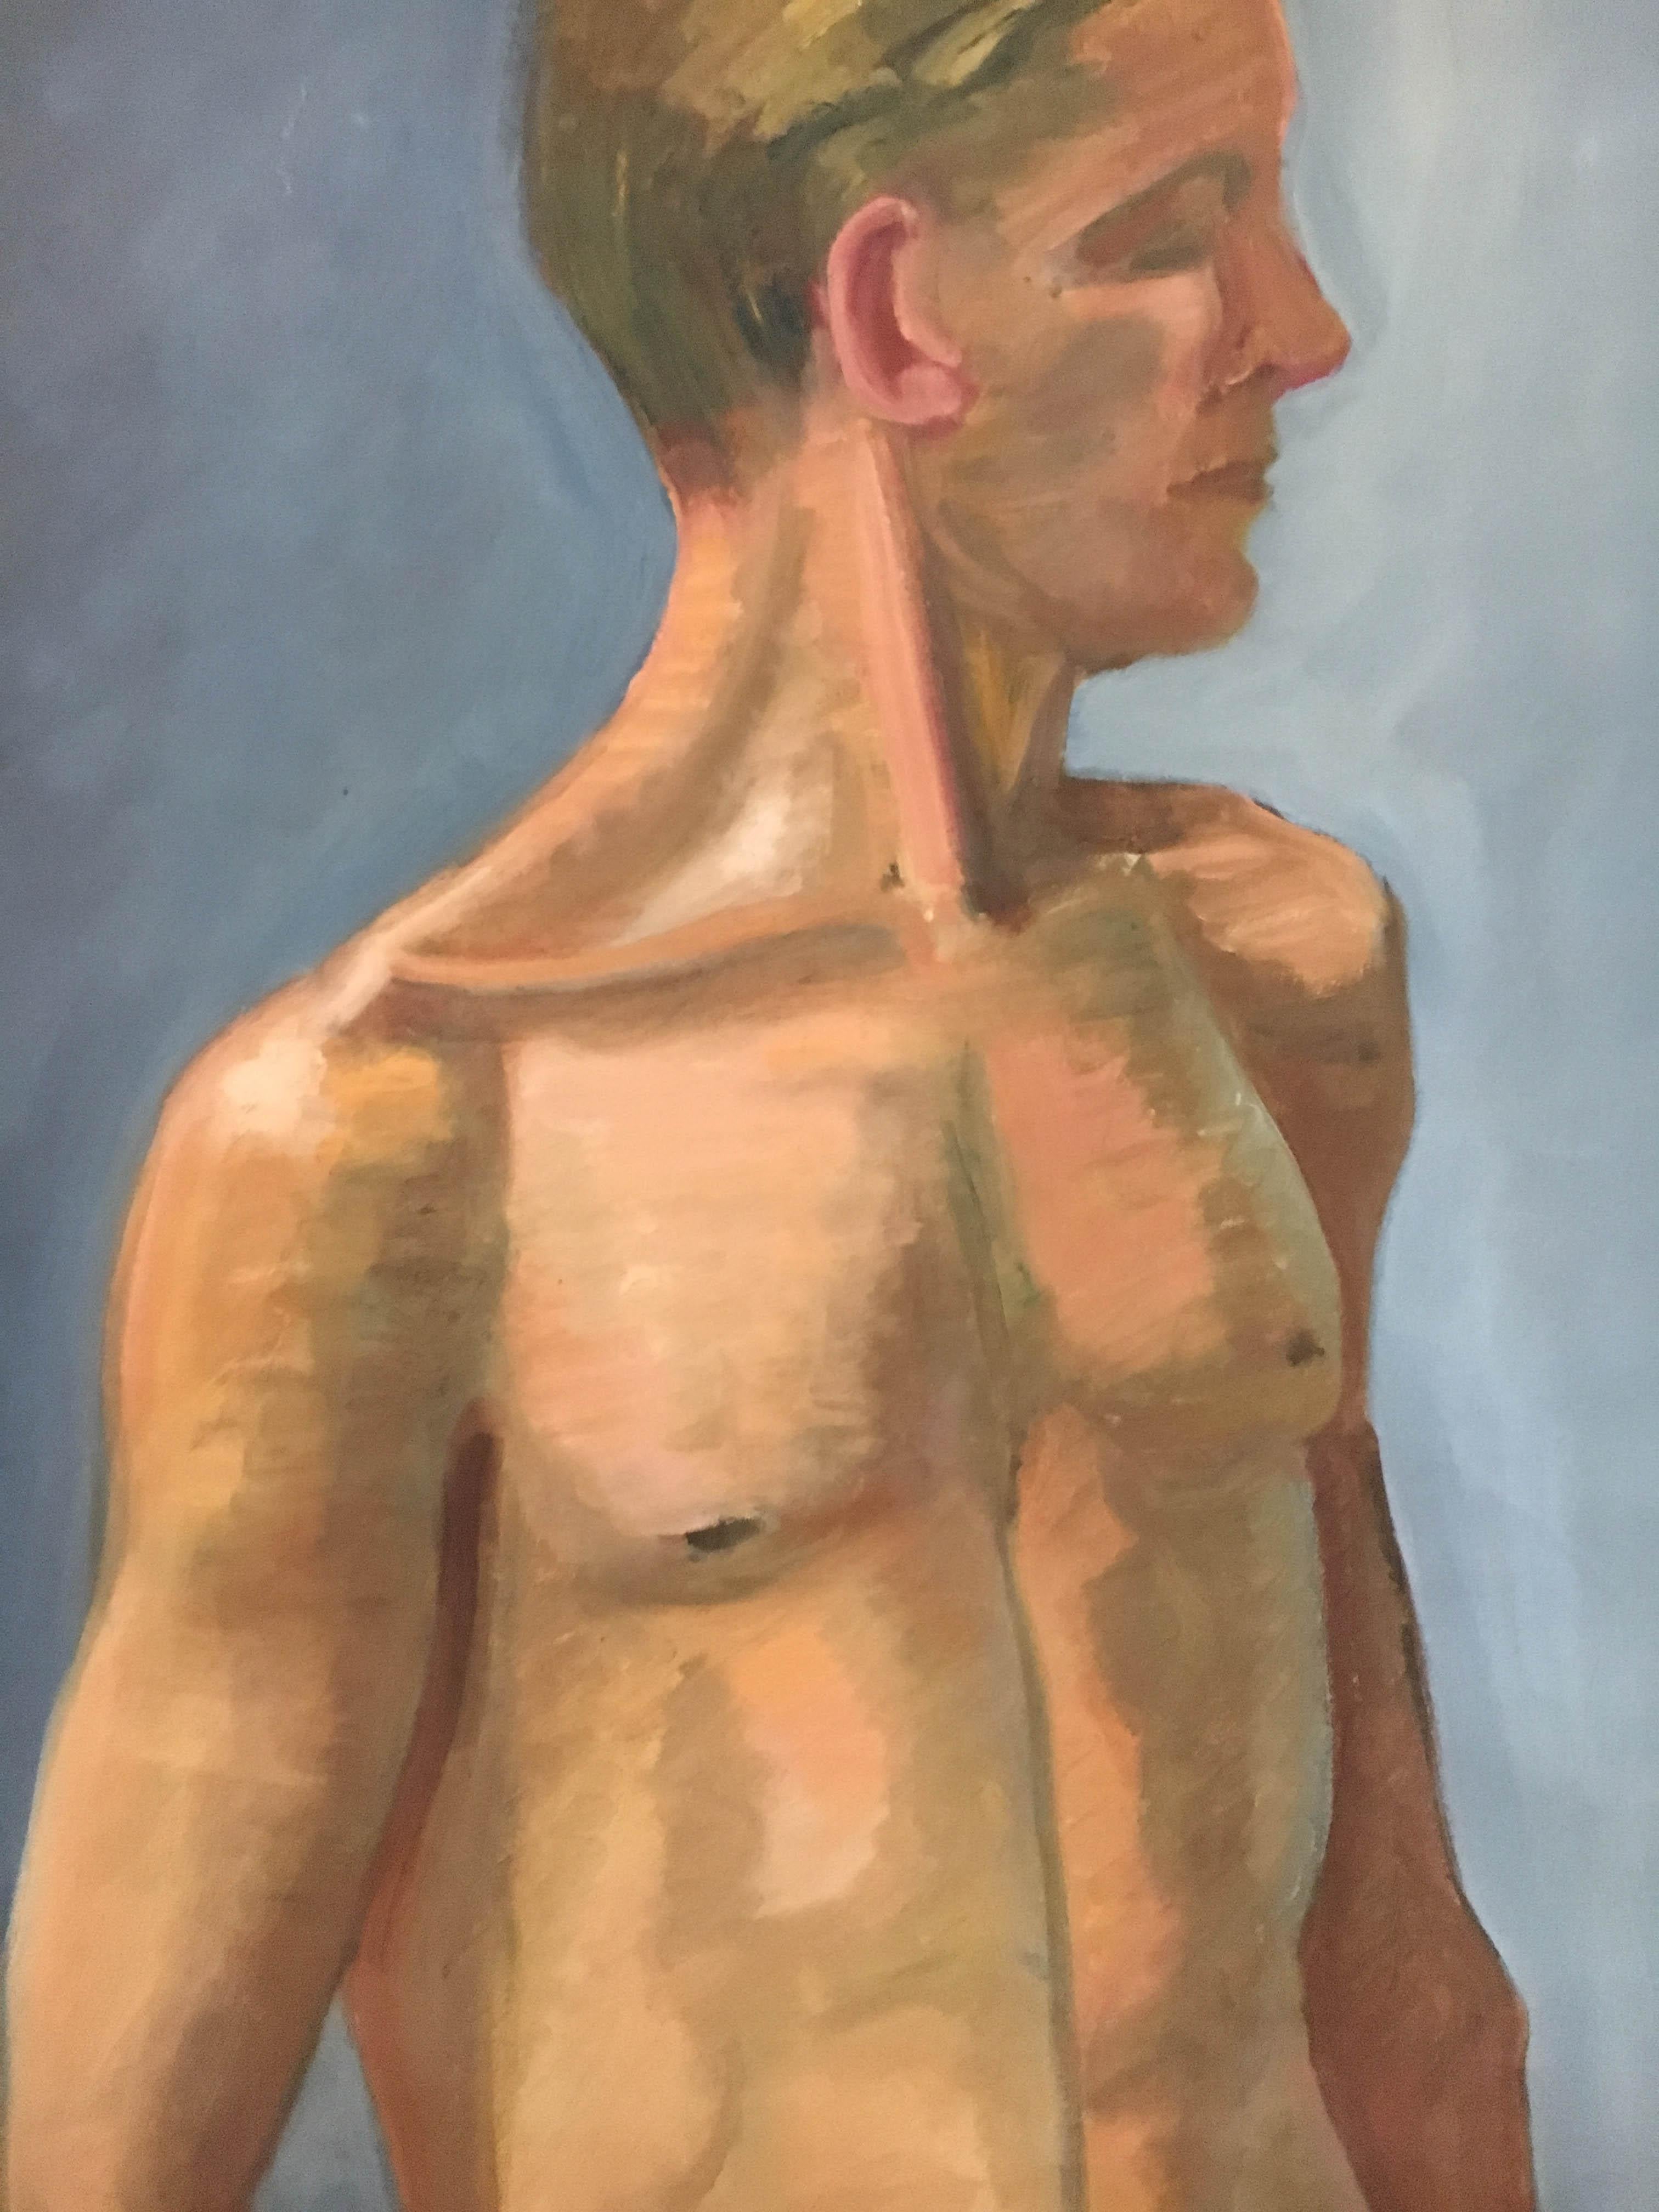 Mid-20th Century 1933 Male 'White' Men Nude Portrait Study Oil Painting by Olga von Mossig-Zupan For Sale